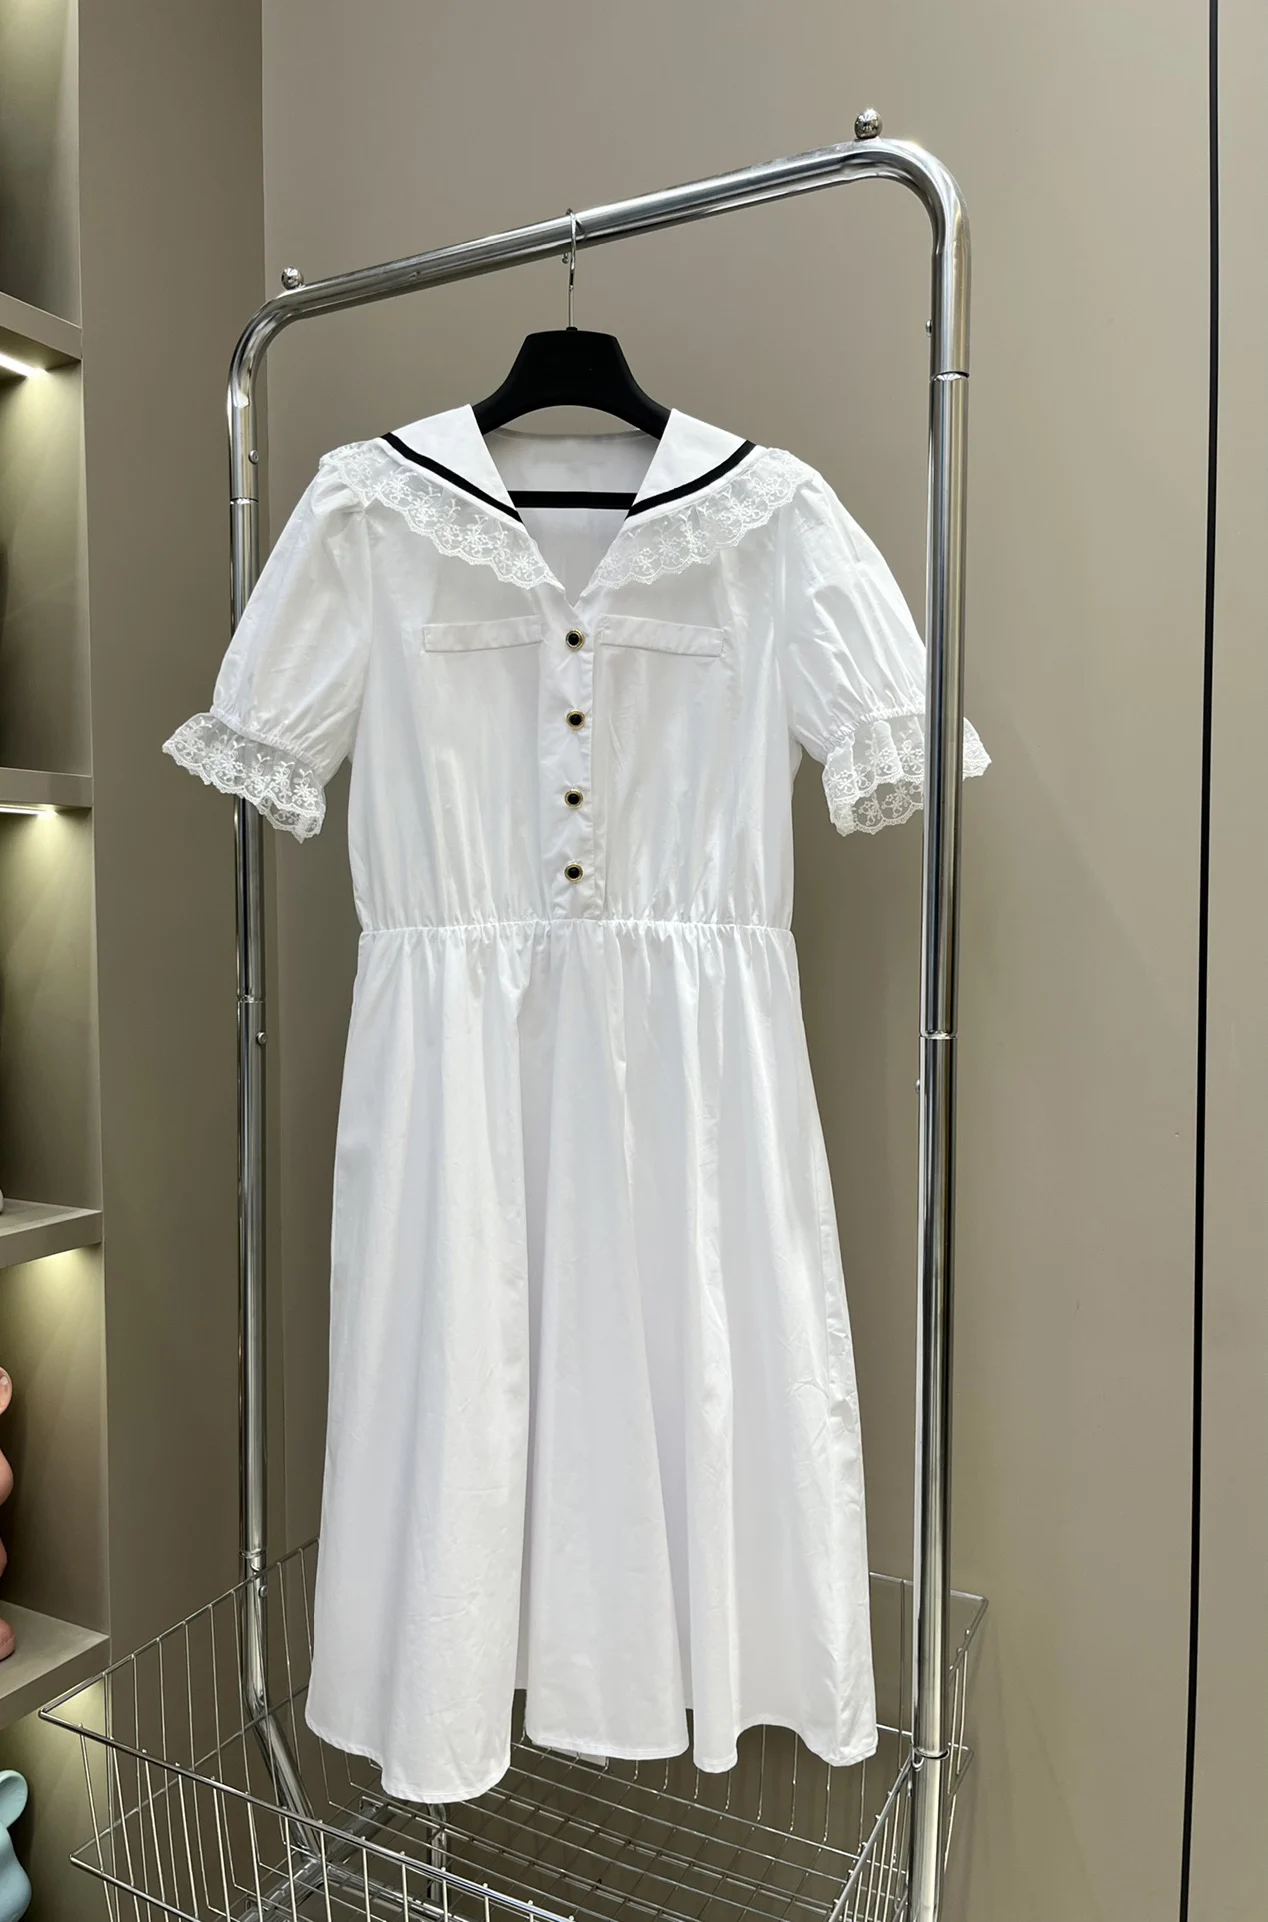 Spring/summer new Naval Academy style bubble short sleeve waist dress with lace trim713